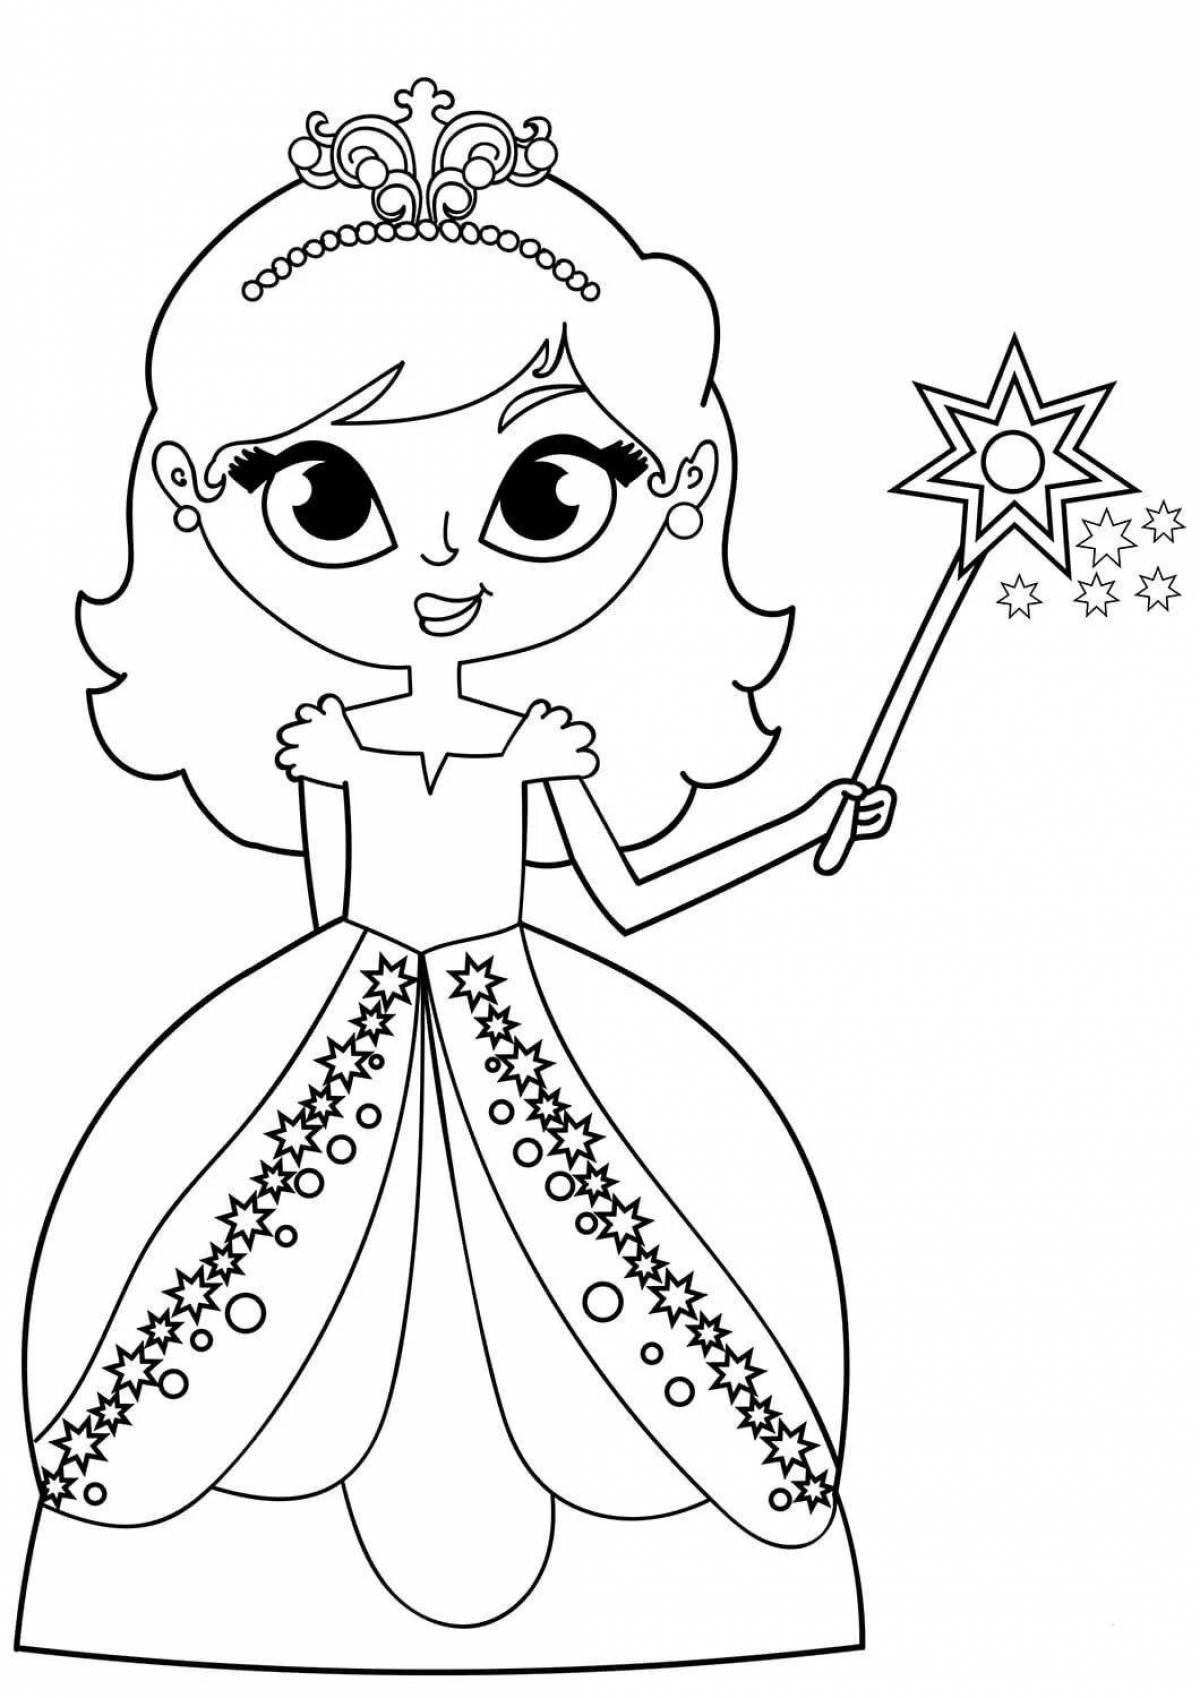 Incredible coloring book for girls 5 years old, princess